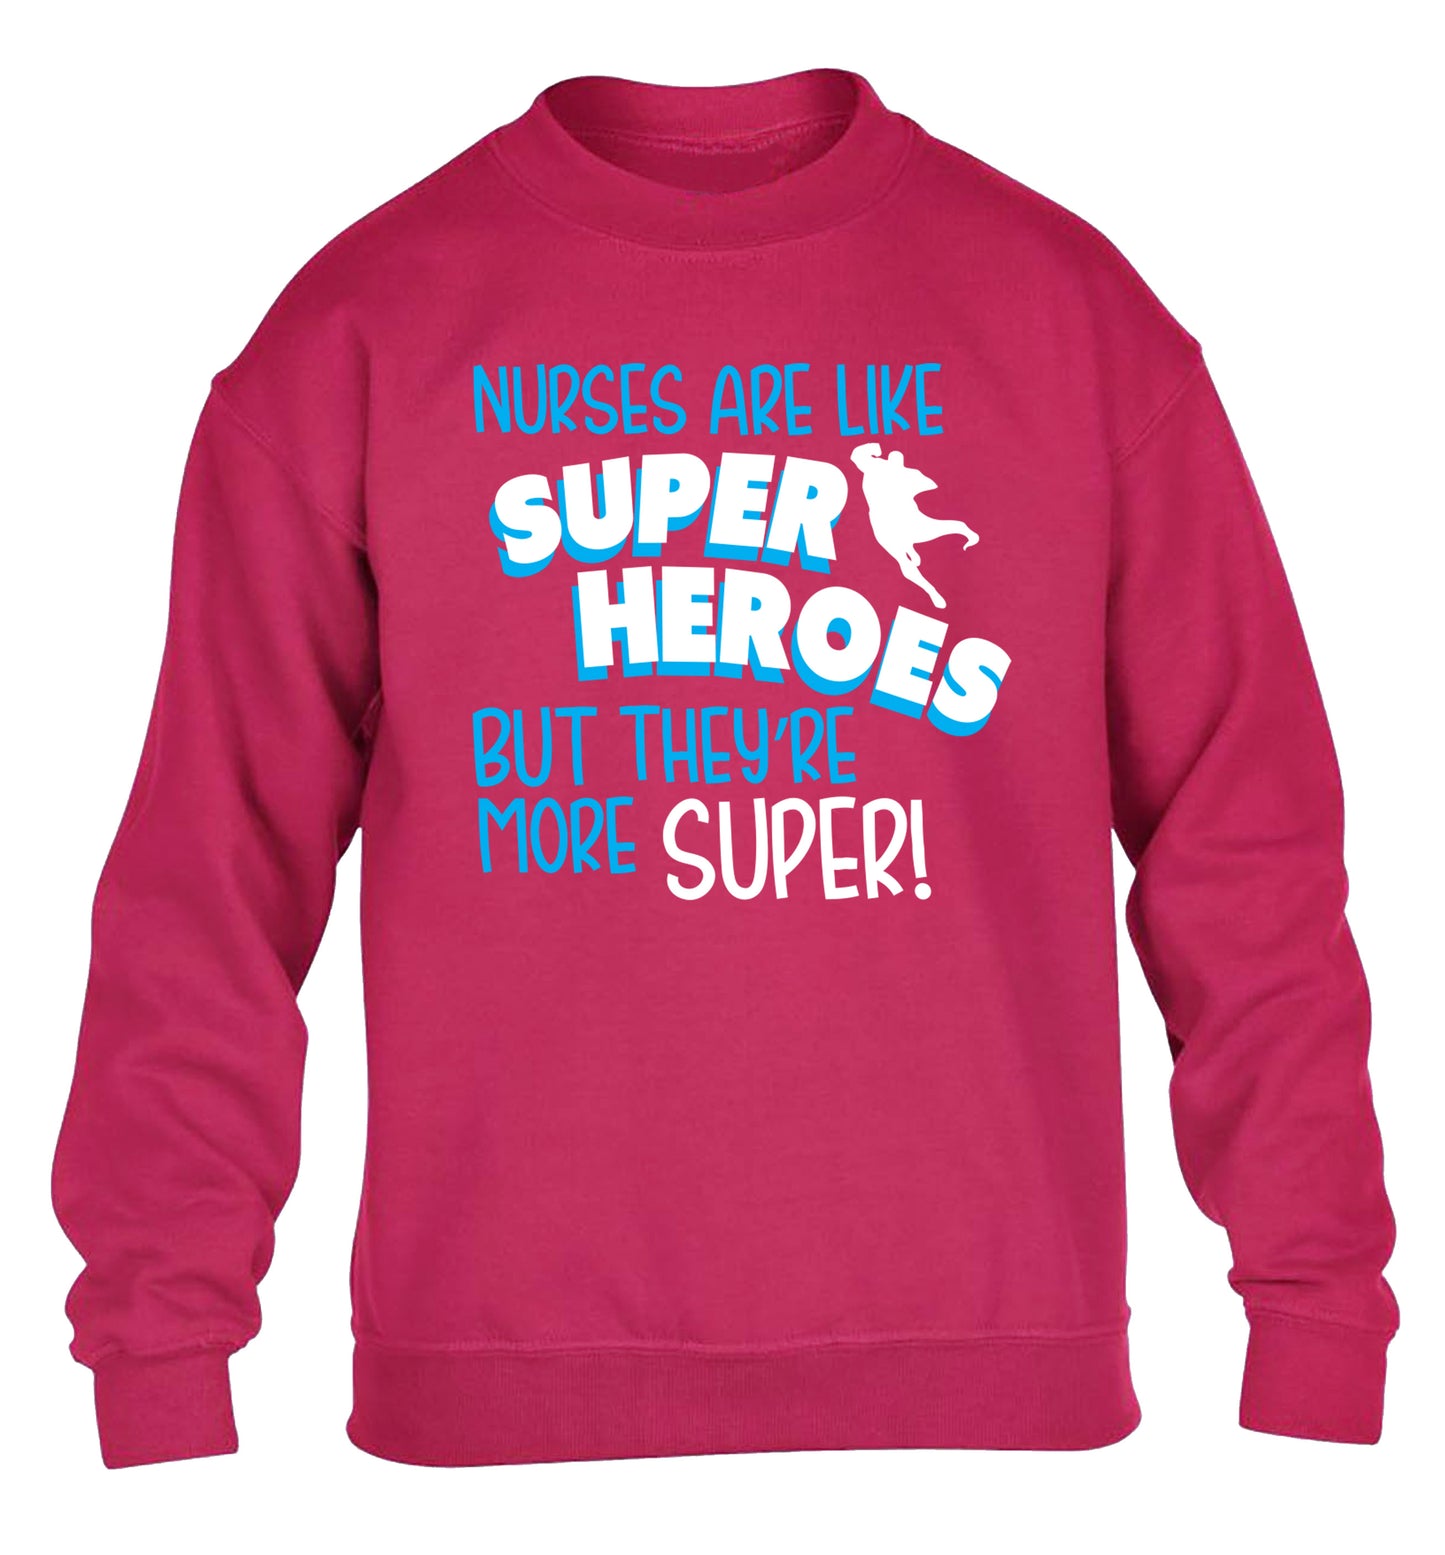 Nurses are like superheros but they're more super children's pink sweater 12-13 Years